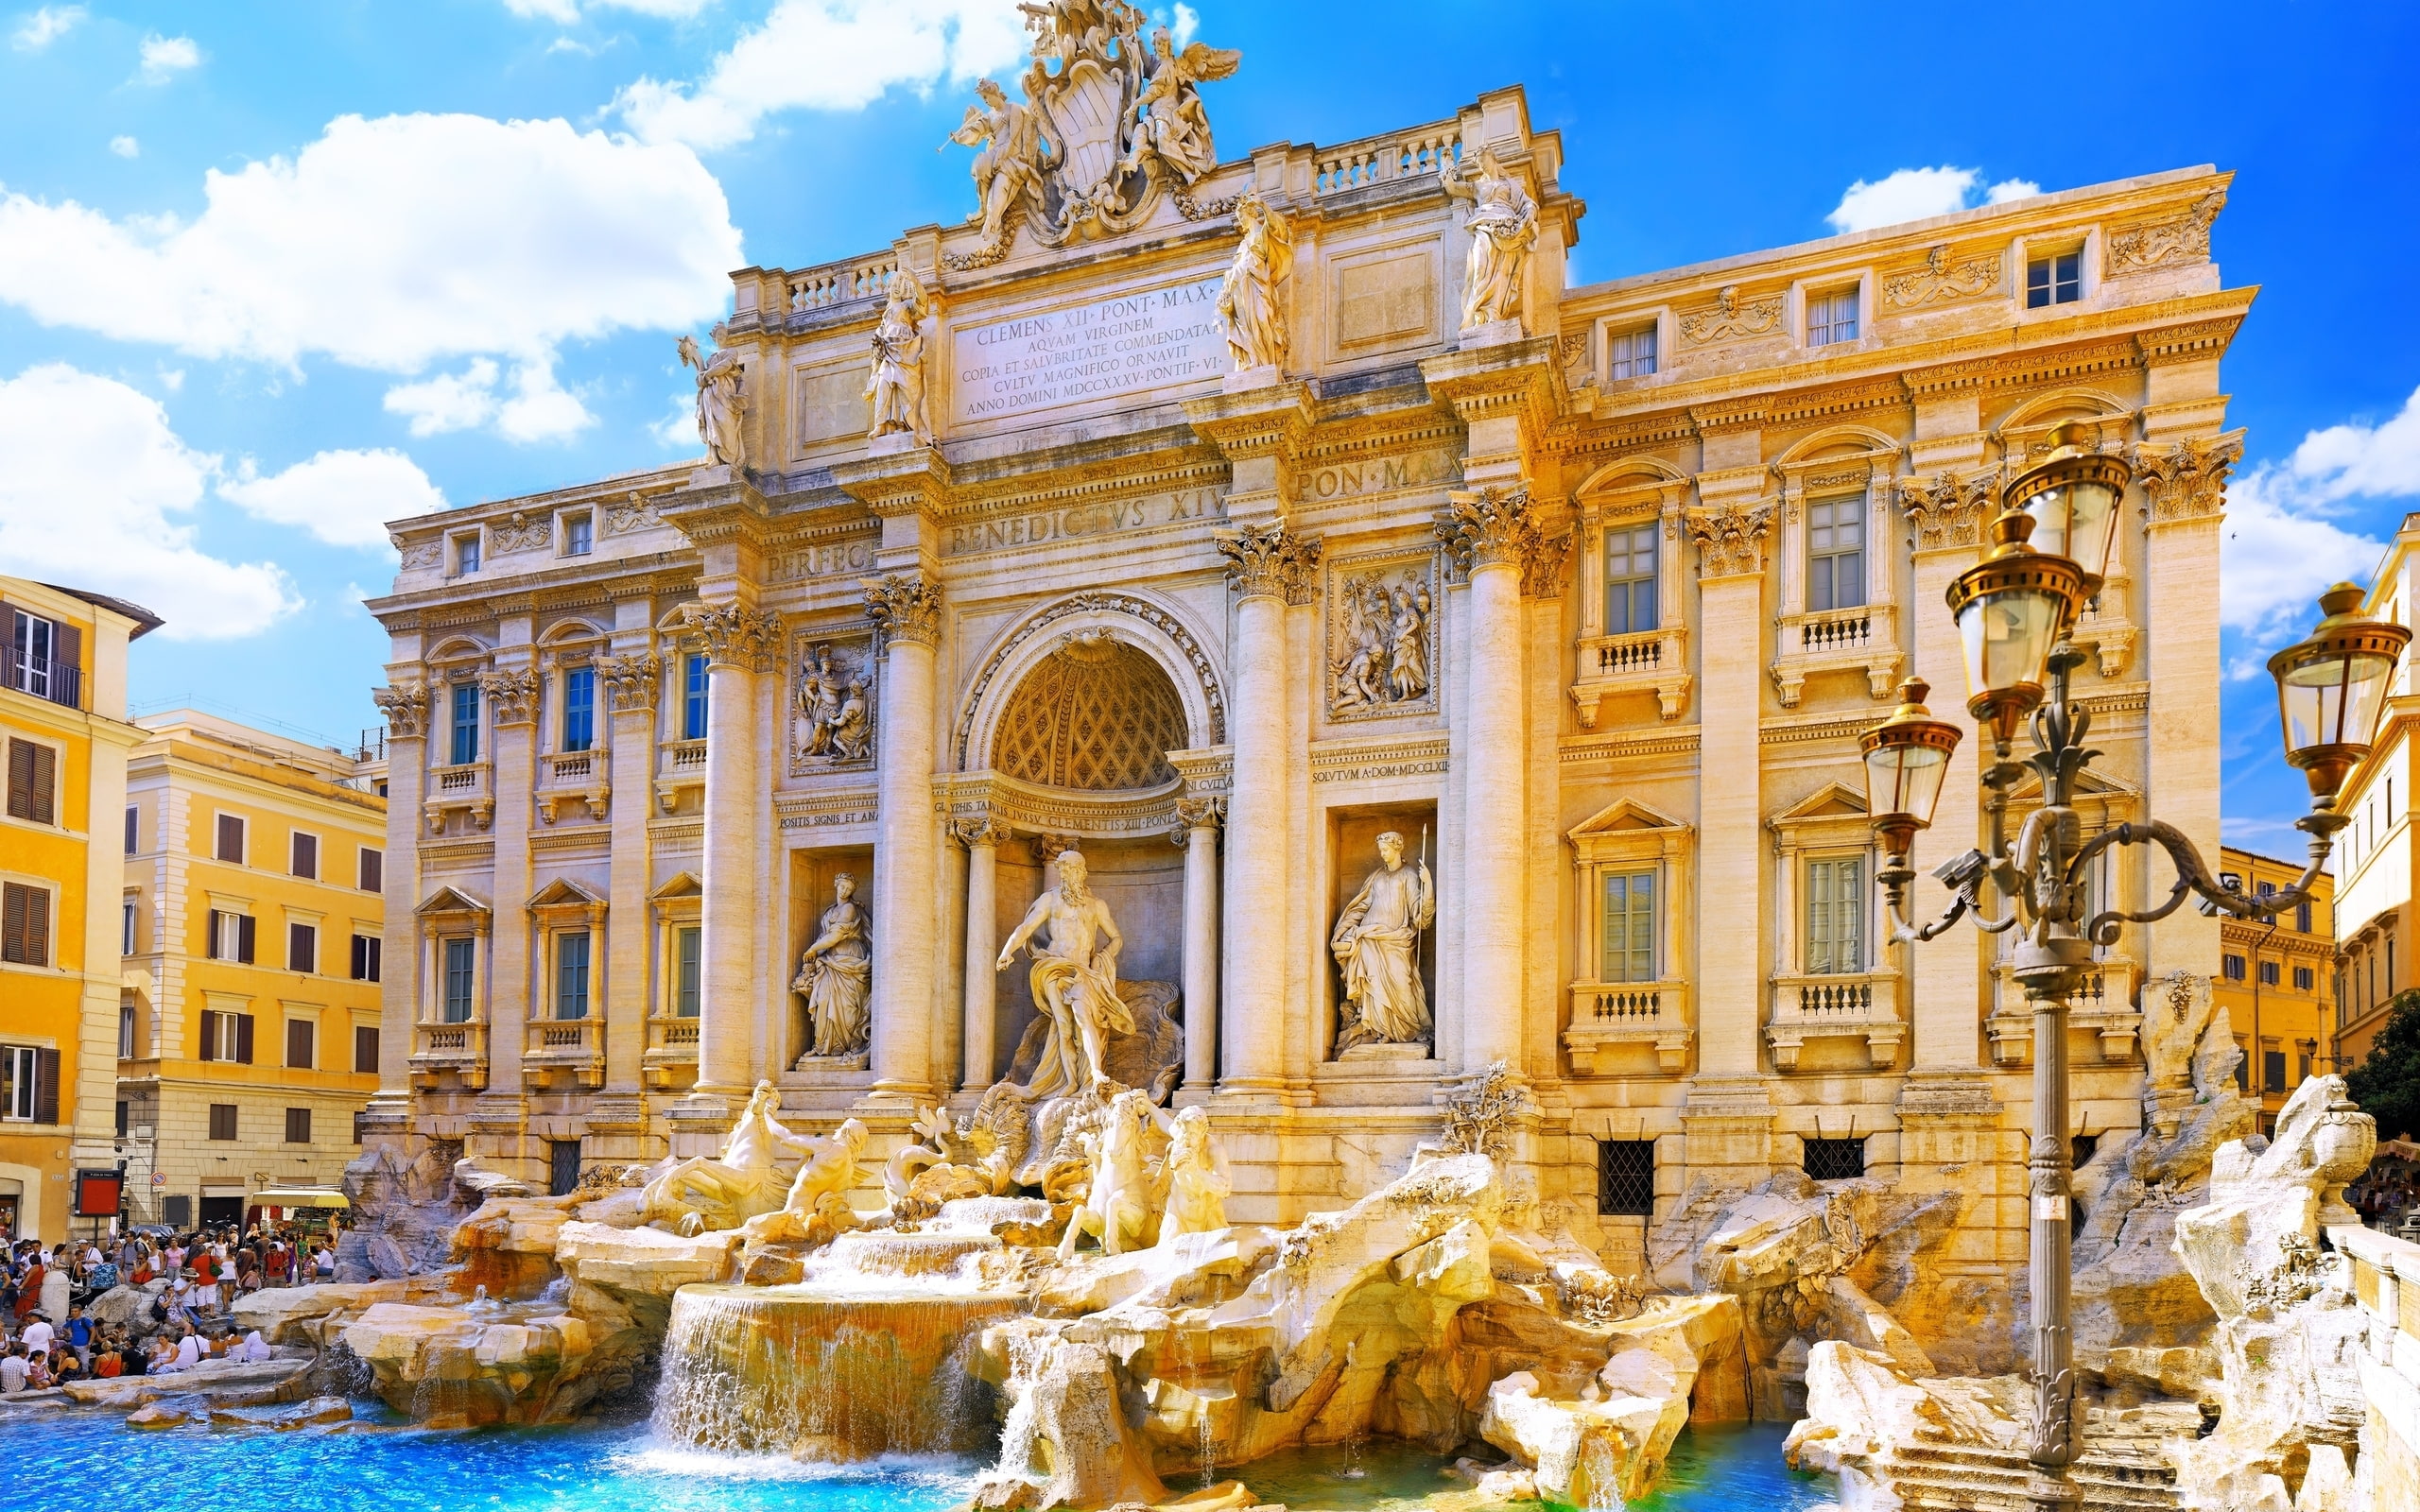 The Trevi Fountain, pics, picture, photo, italy, image